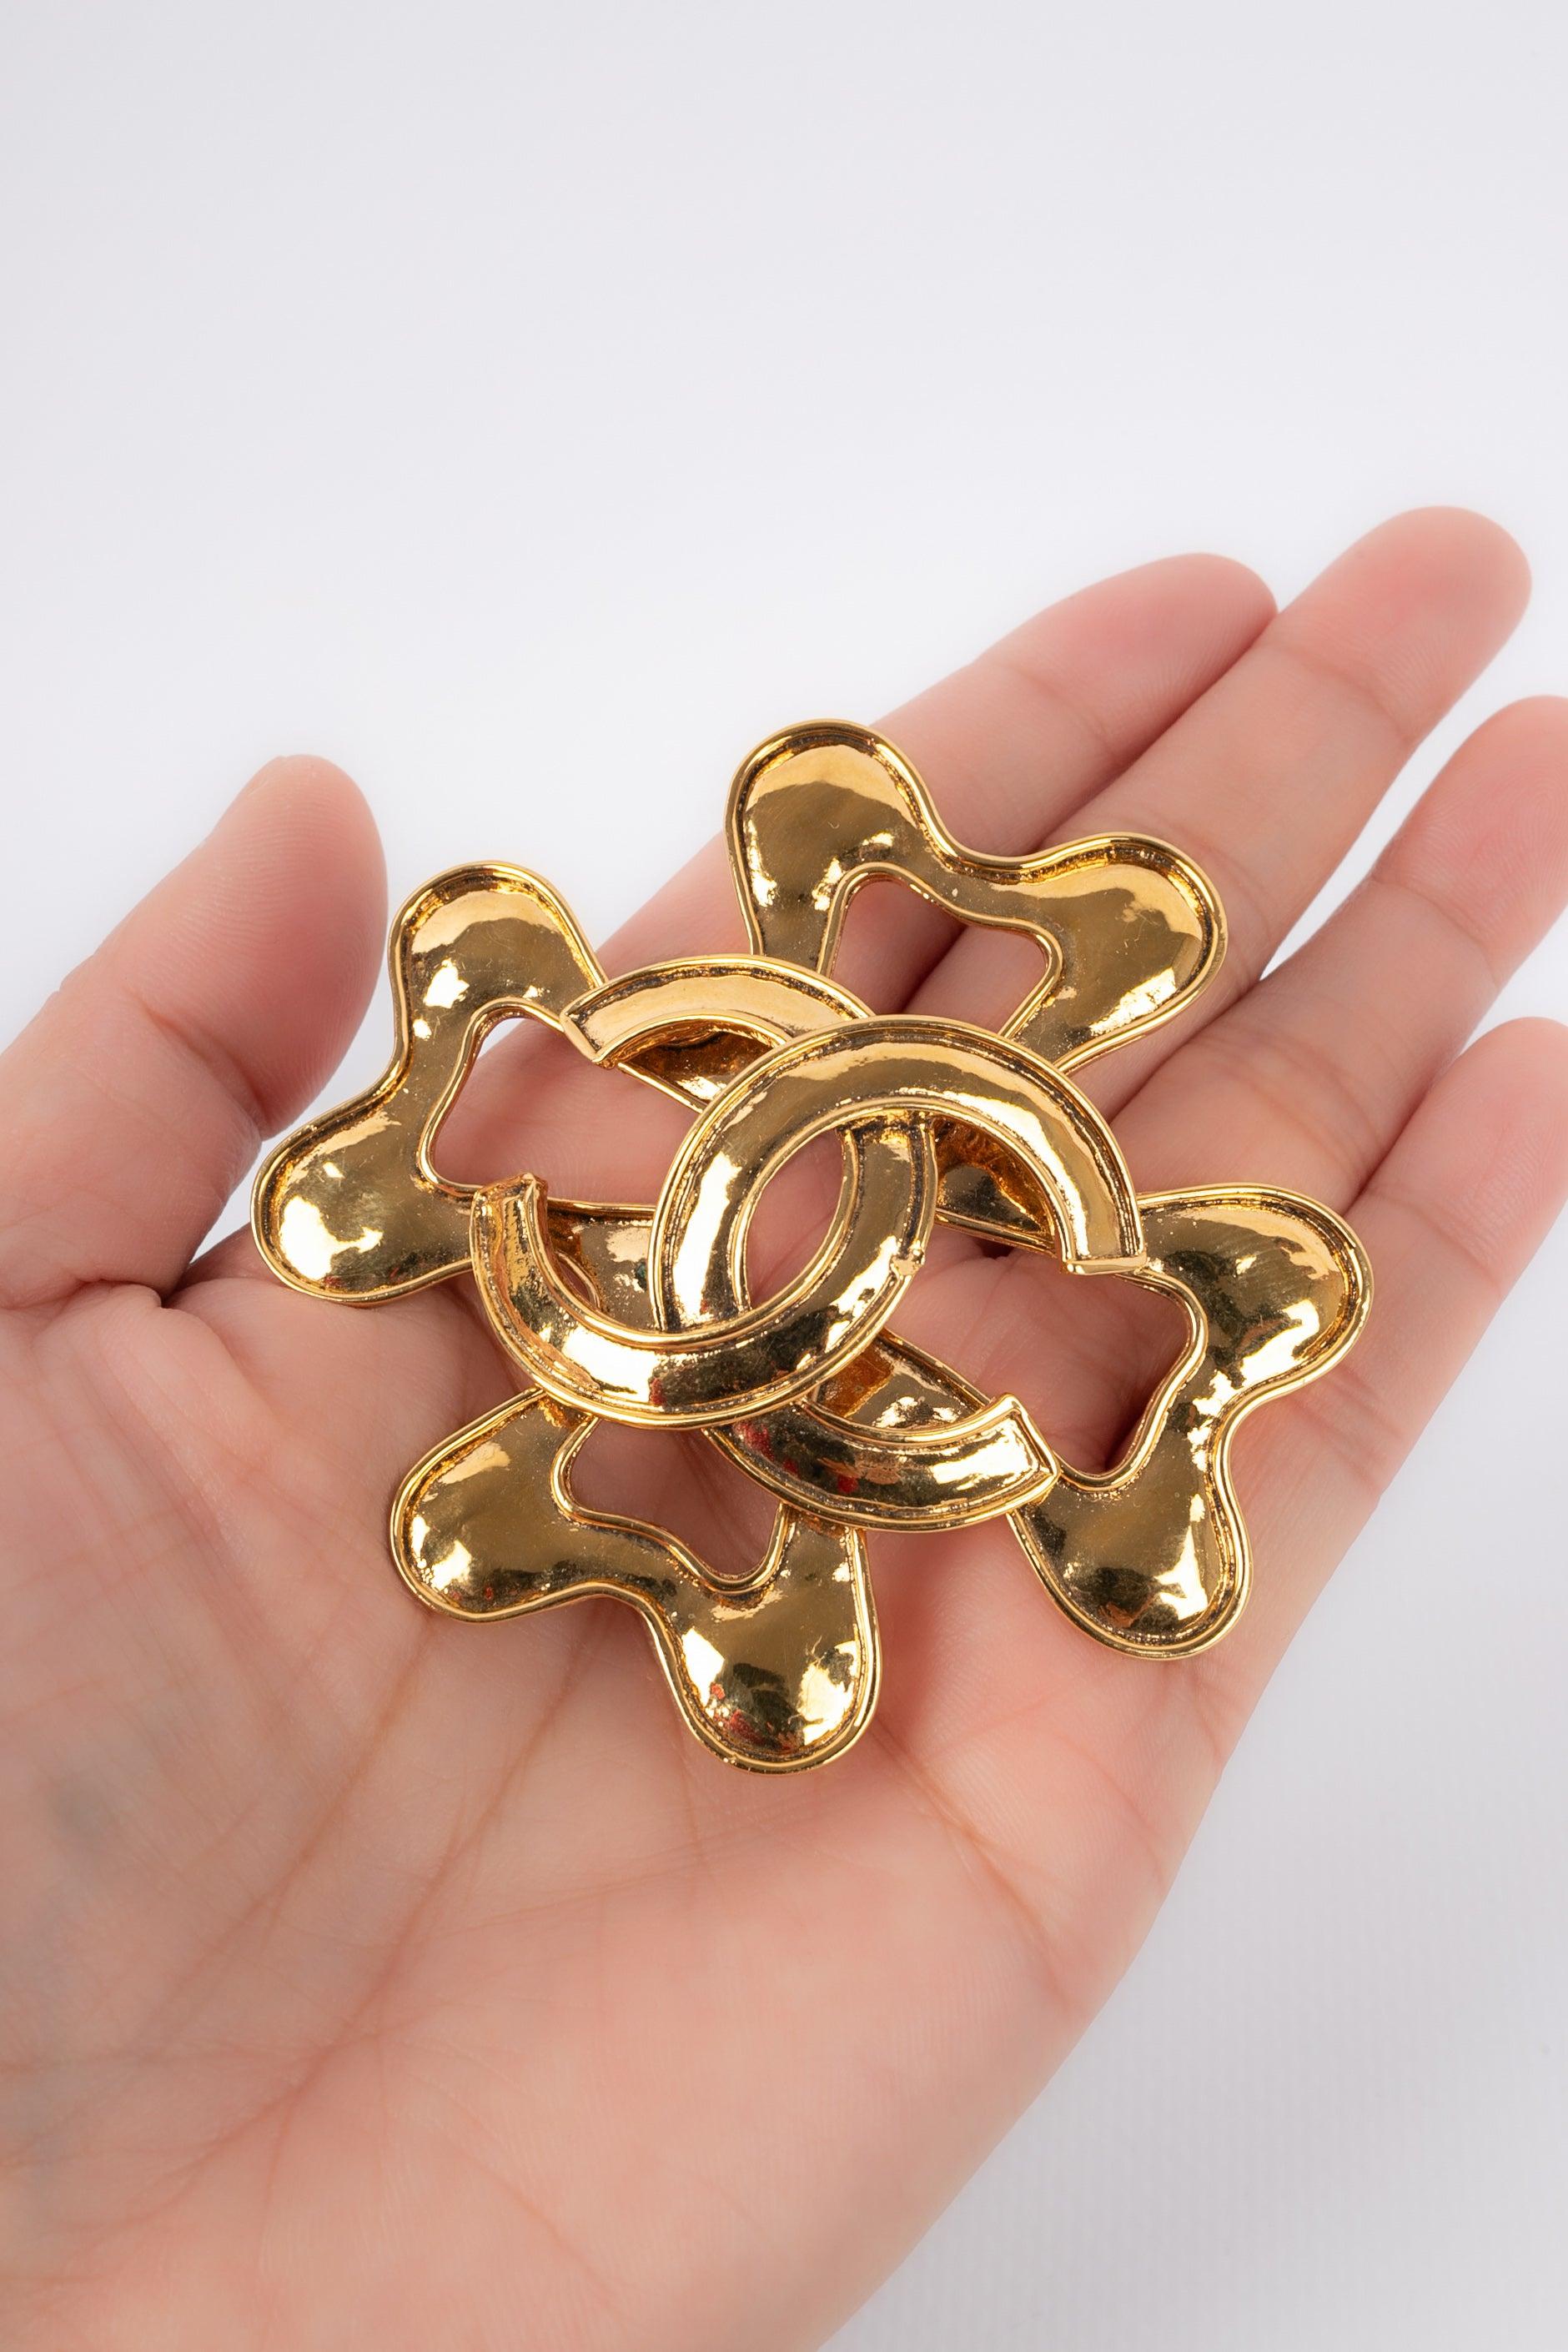 Chanel Brooch in Golden Metal Brooch with CC Logo, 1995 For Sale 3